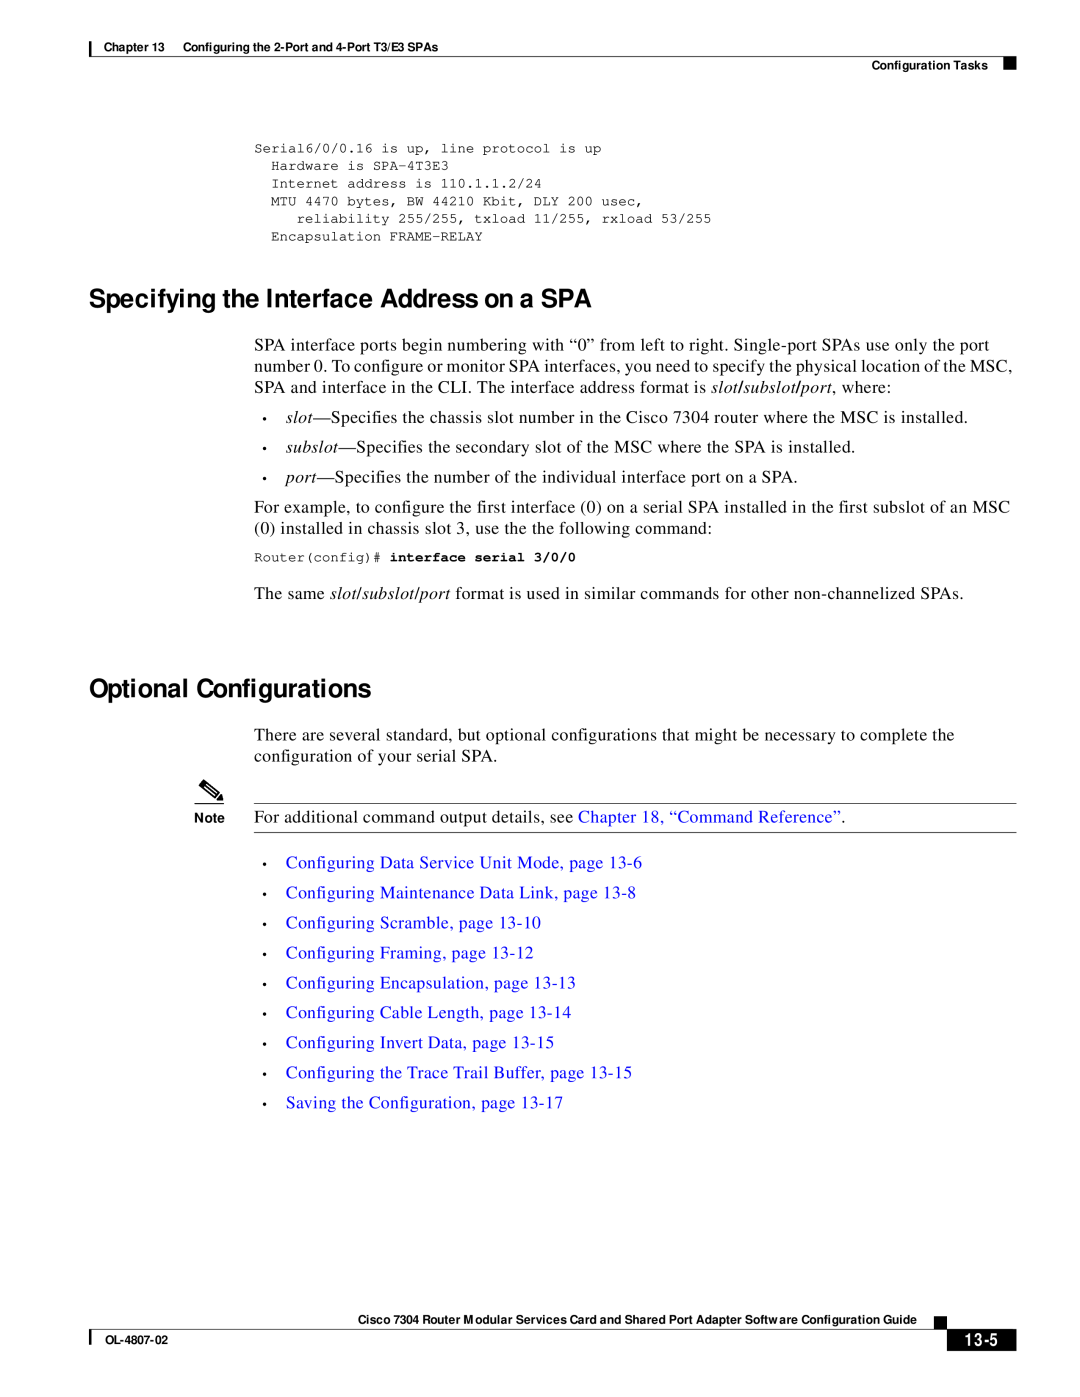 Cisco Systems 7304 Specifying the Interface Address on a SPA, Optional Configurations, Saving the Configuration, page 